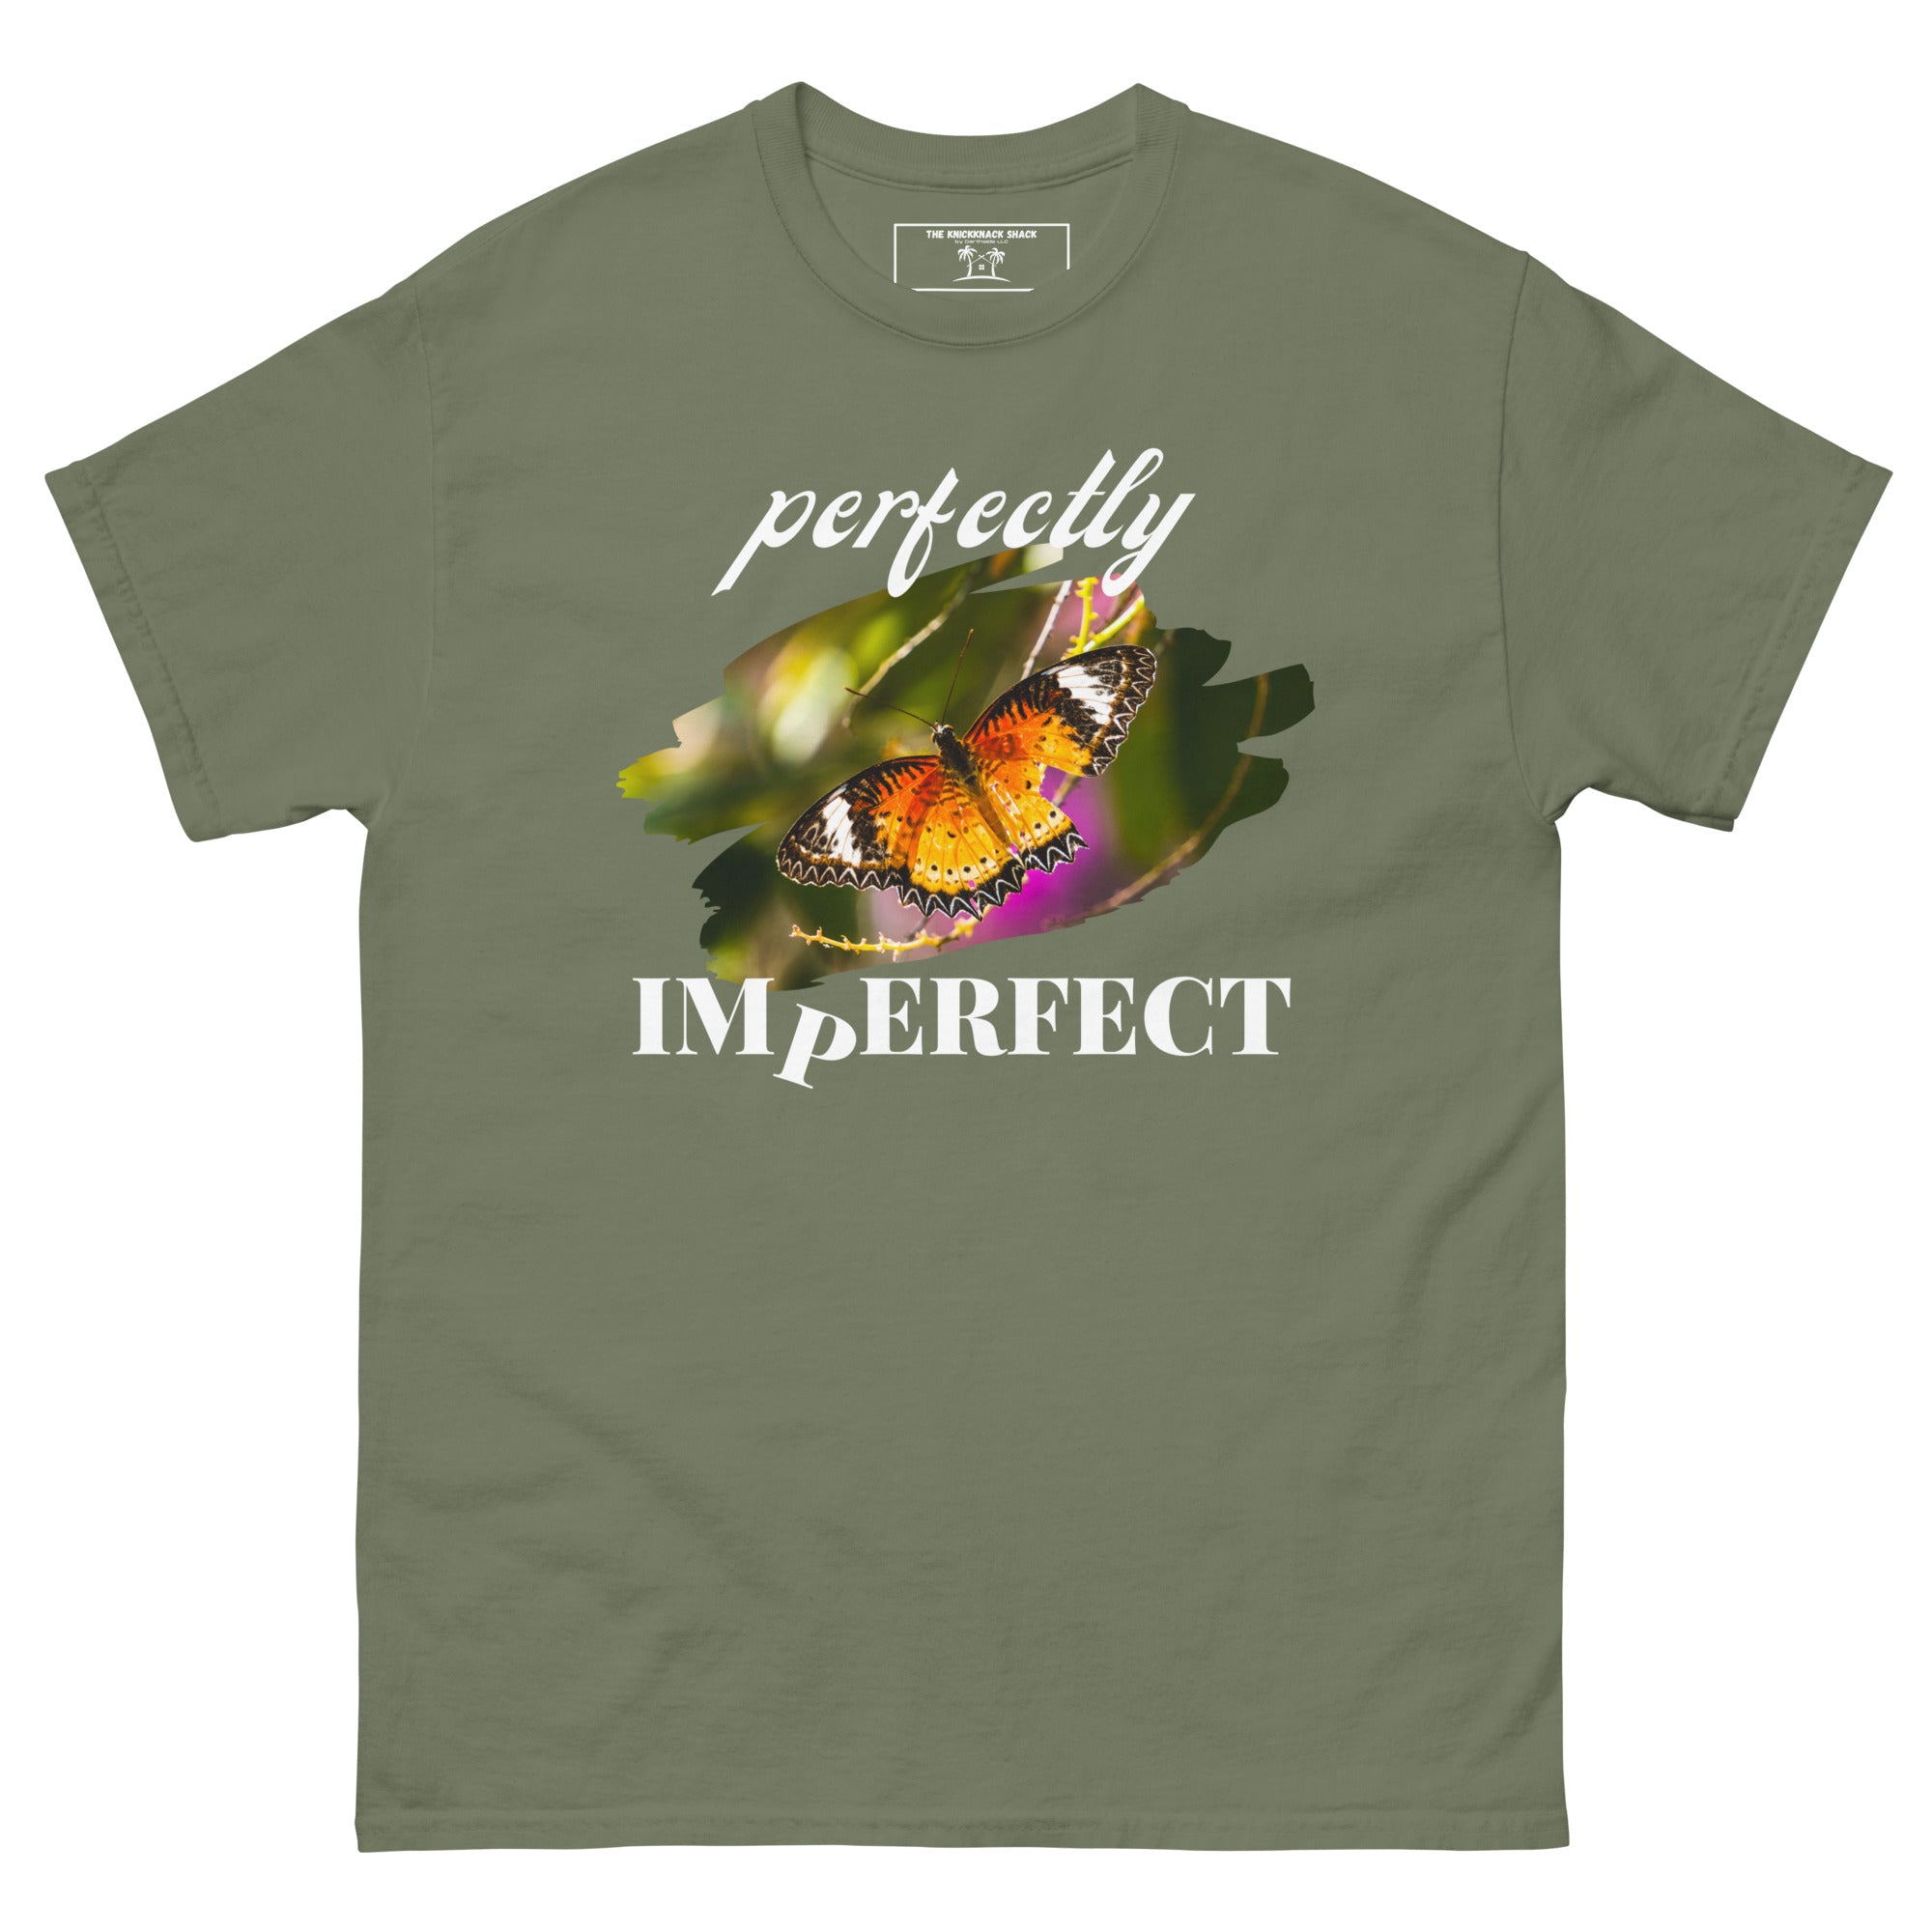 Classic Tee - Perfectly Imperfect (Style 2) (Dark Colors)